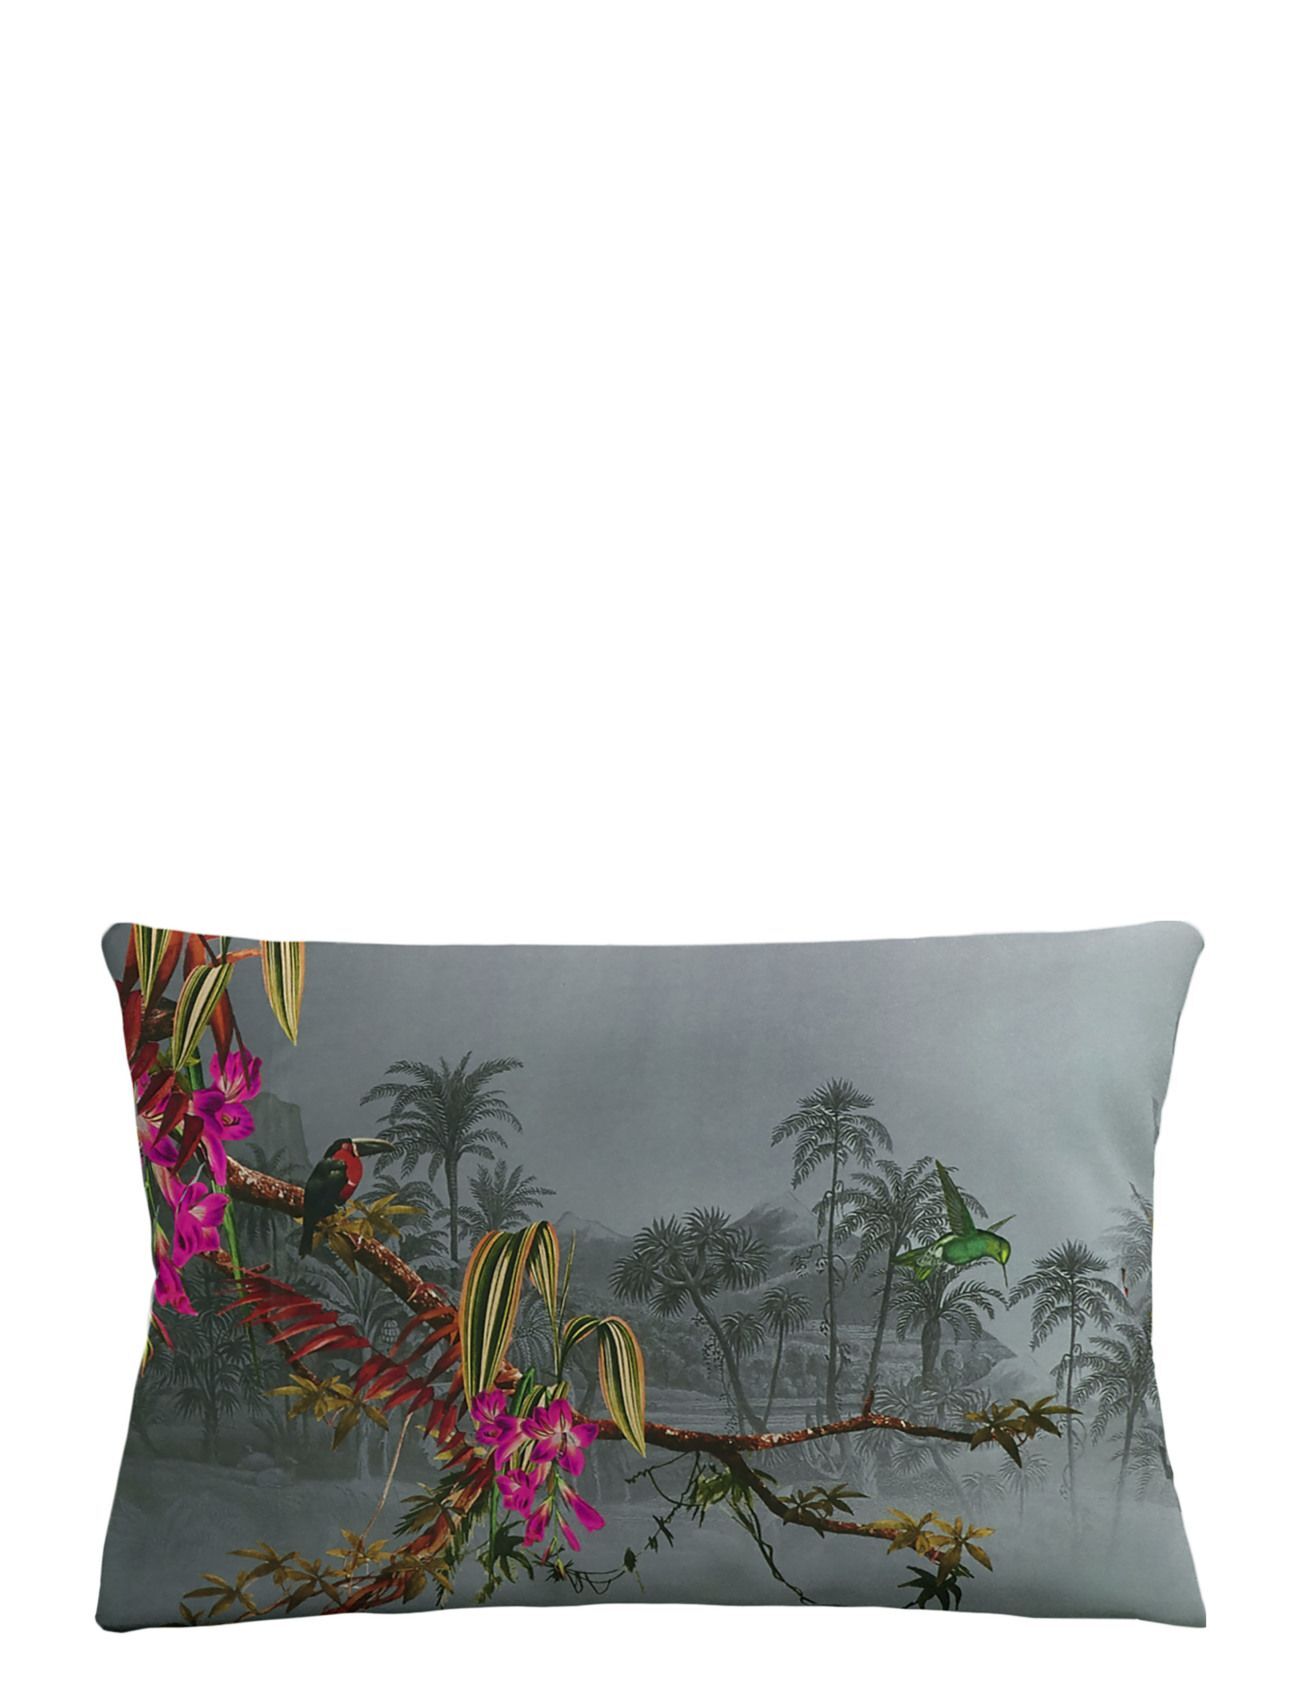 Ted Baker Pillowcase Single 1 Pc Hibiscus Home Textiles Bedtextiles Pillow Cases Grå Ted Baker